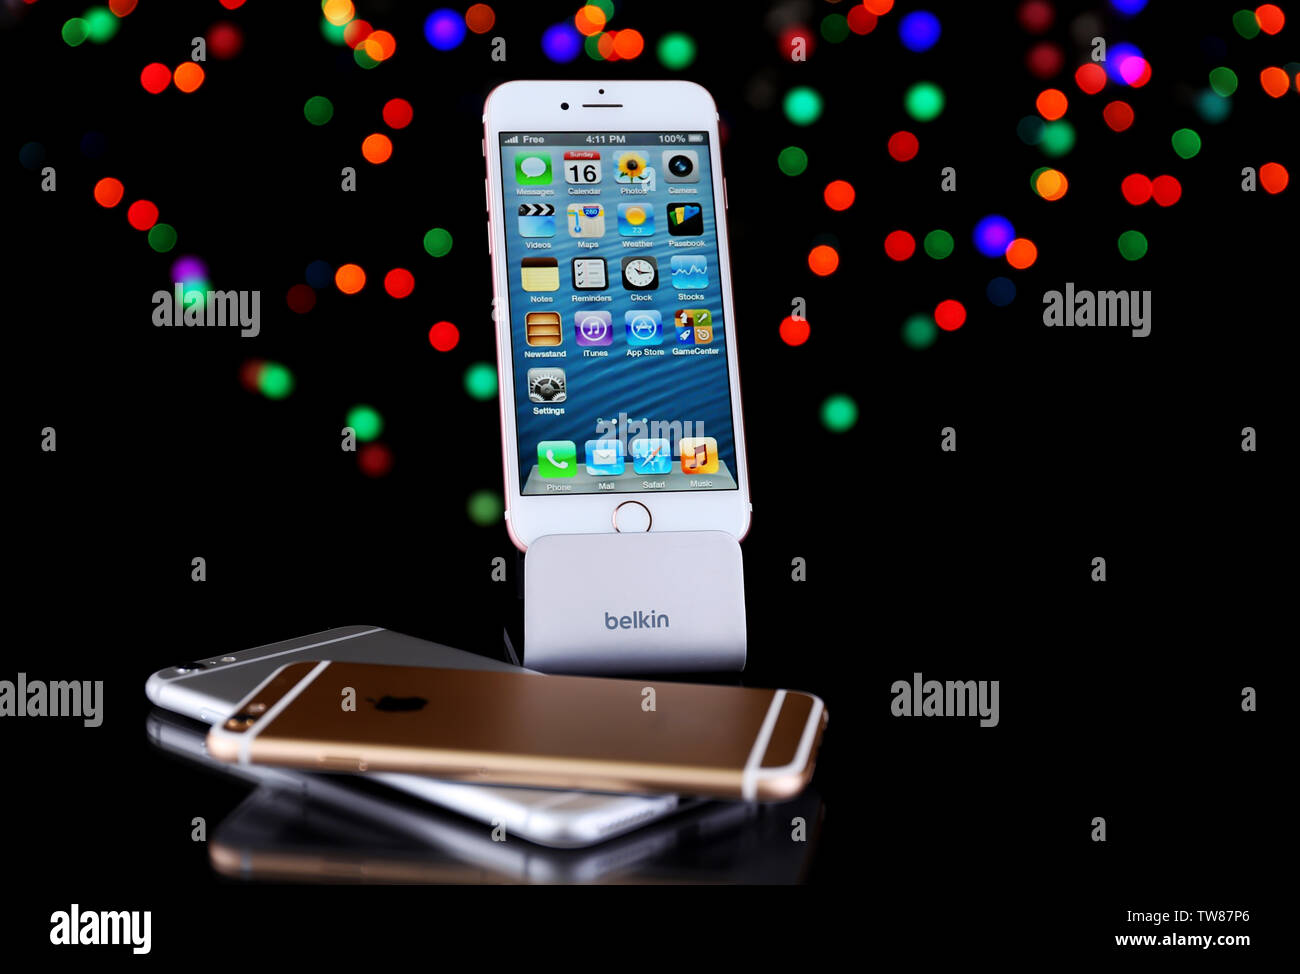 KIEV, UKRAINE - OCTOBER 19, 2017: iPhone 7 Rose gold with home screen on Belkin stand near iPhone 6s Silver and iPhone 6s Gold against blurred lights Stock Photo